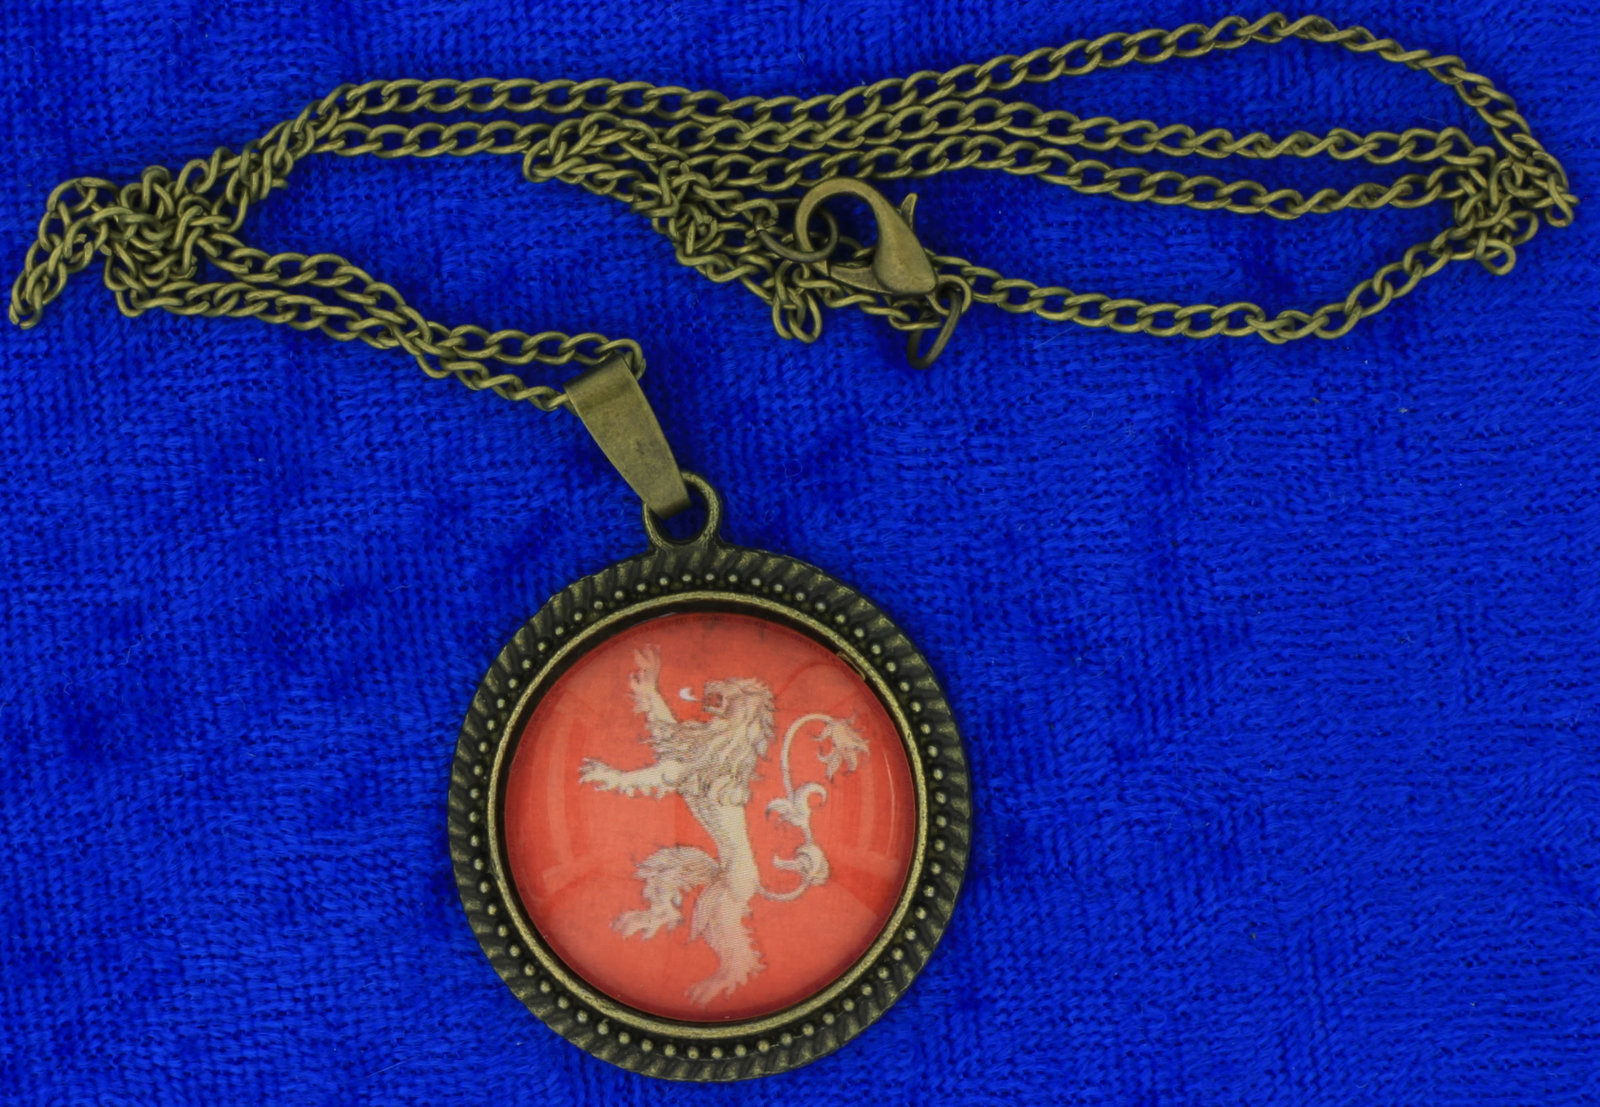 Lannister Lion Necklace or Keychain Game of Thrones Chain Style Length Choice - $4.99 - $6.49